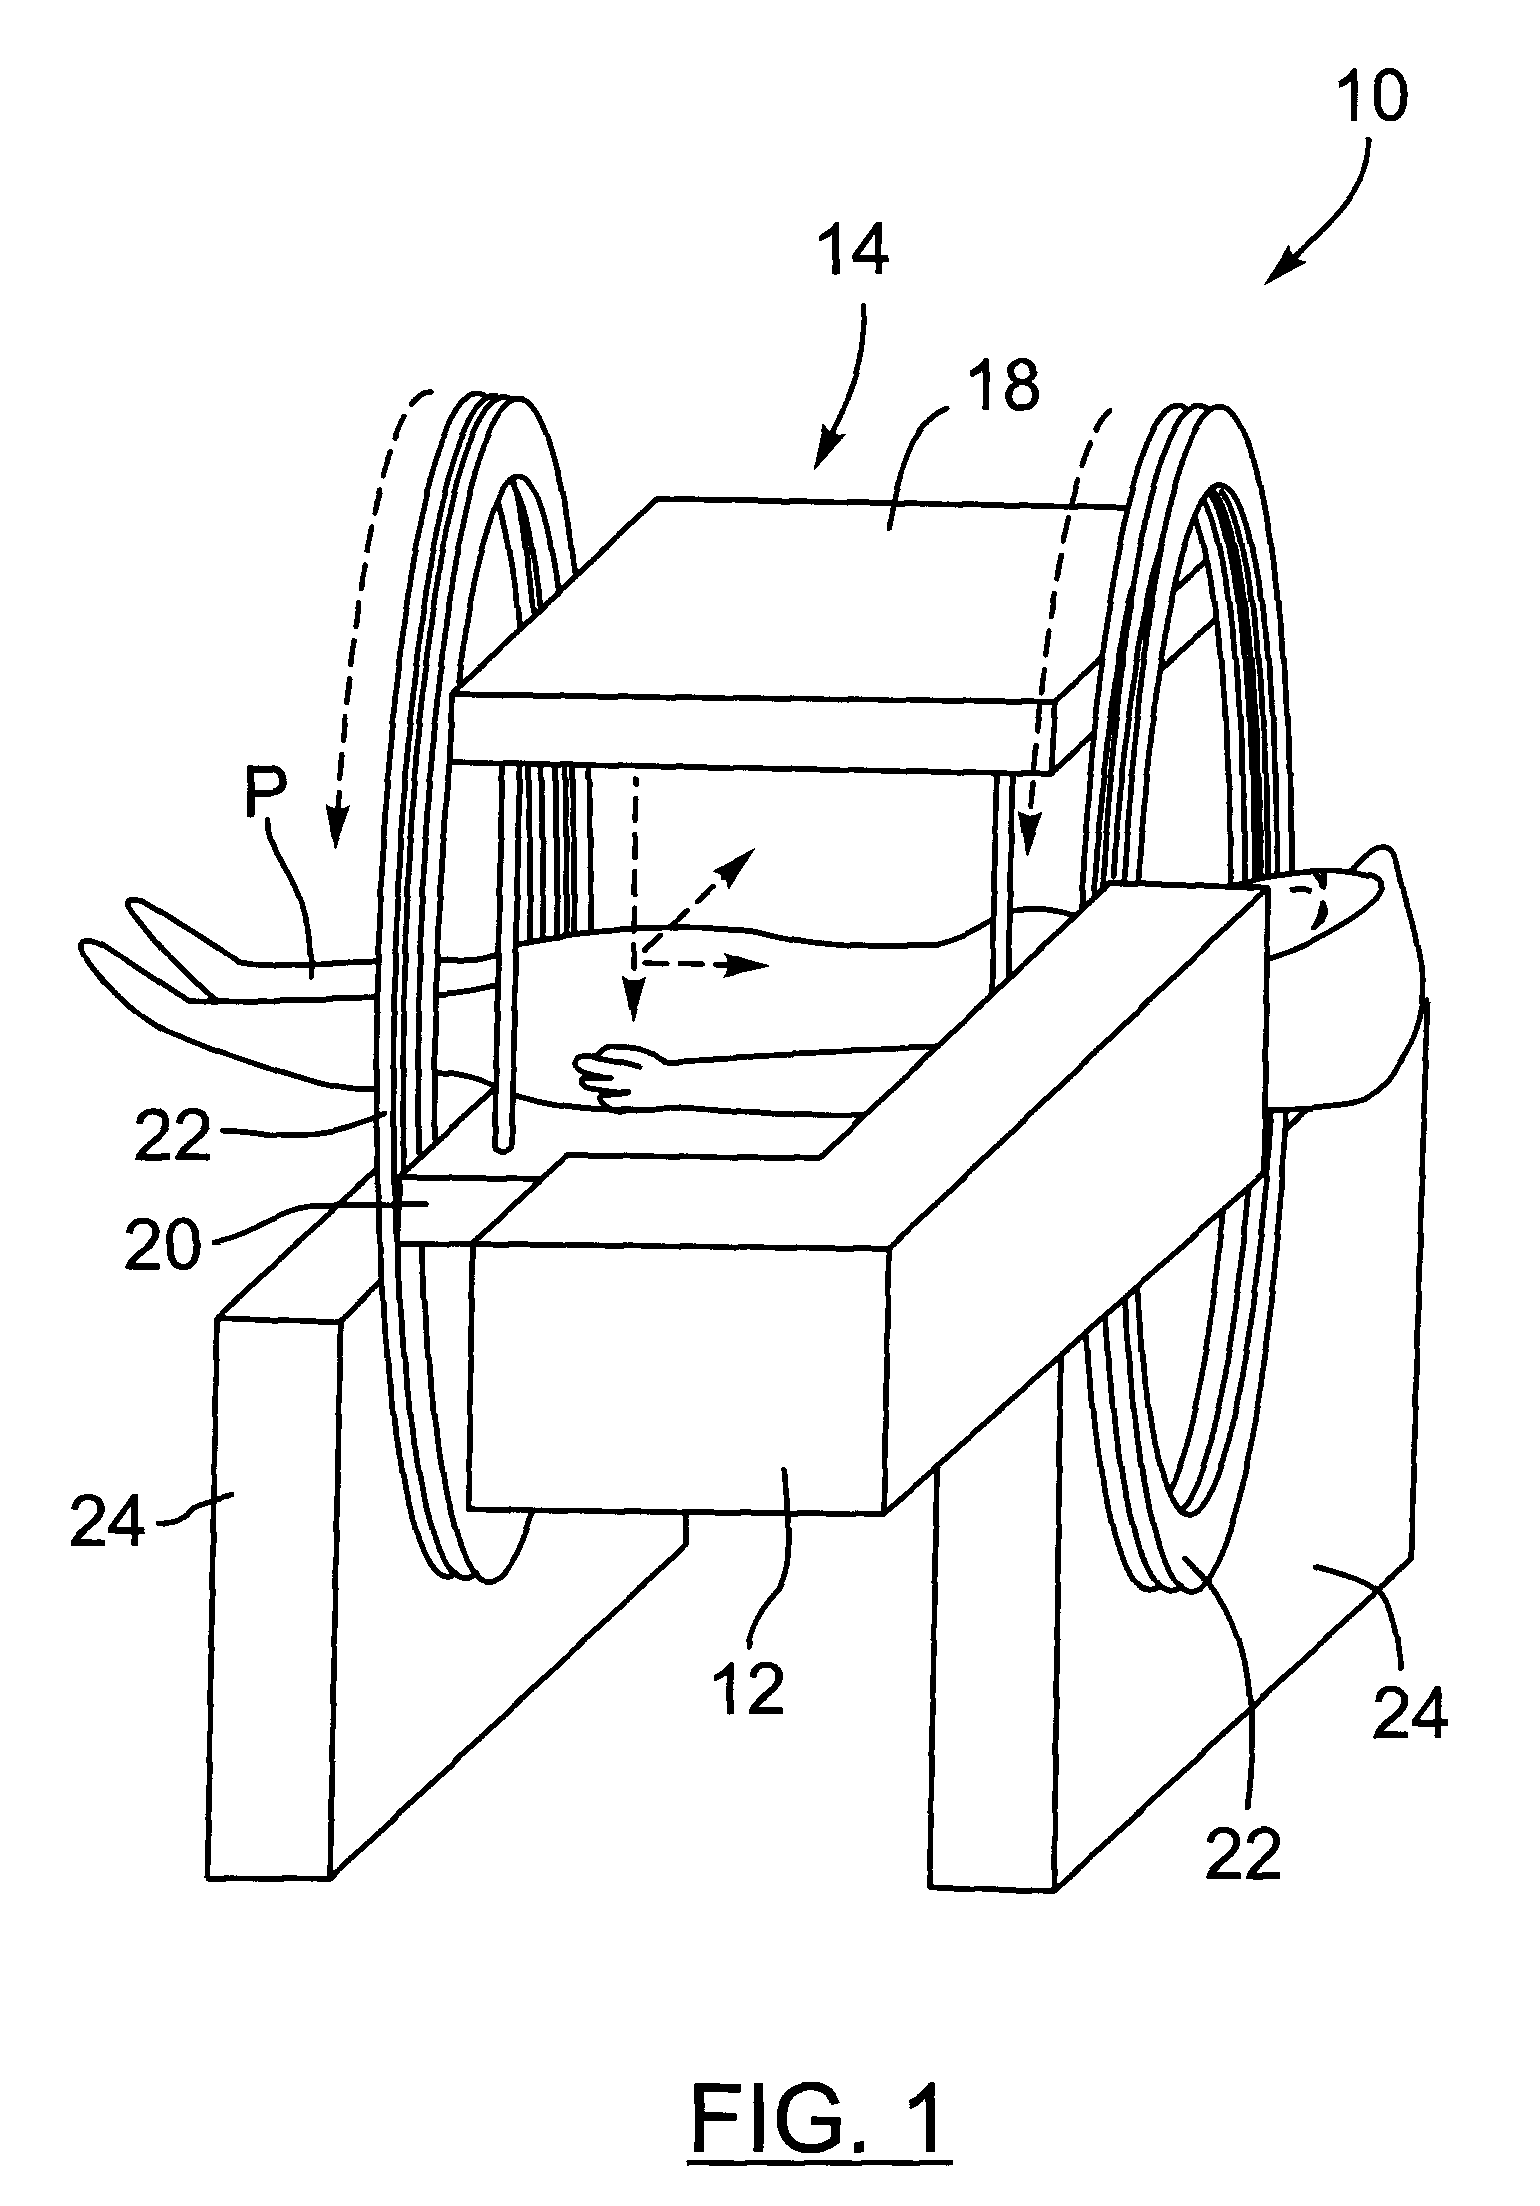 Integrated external beam radiotherapy and MRI system